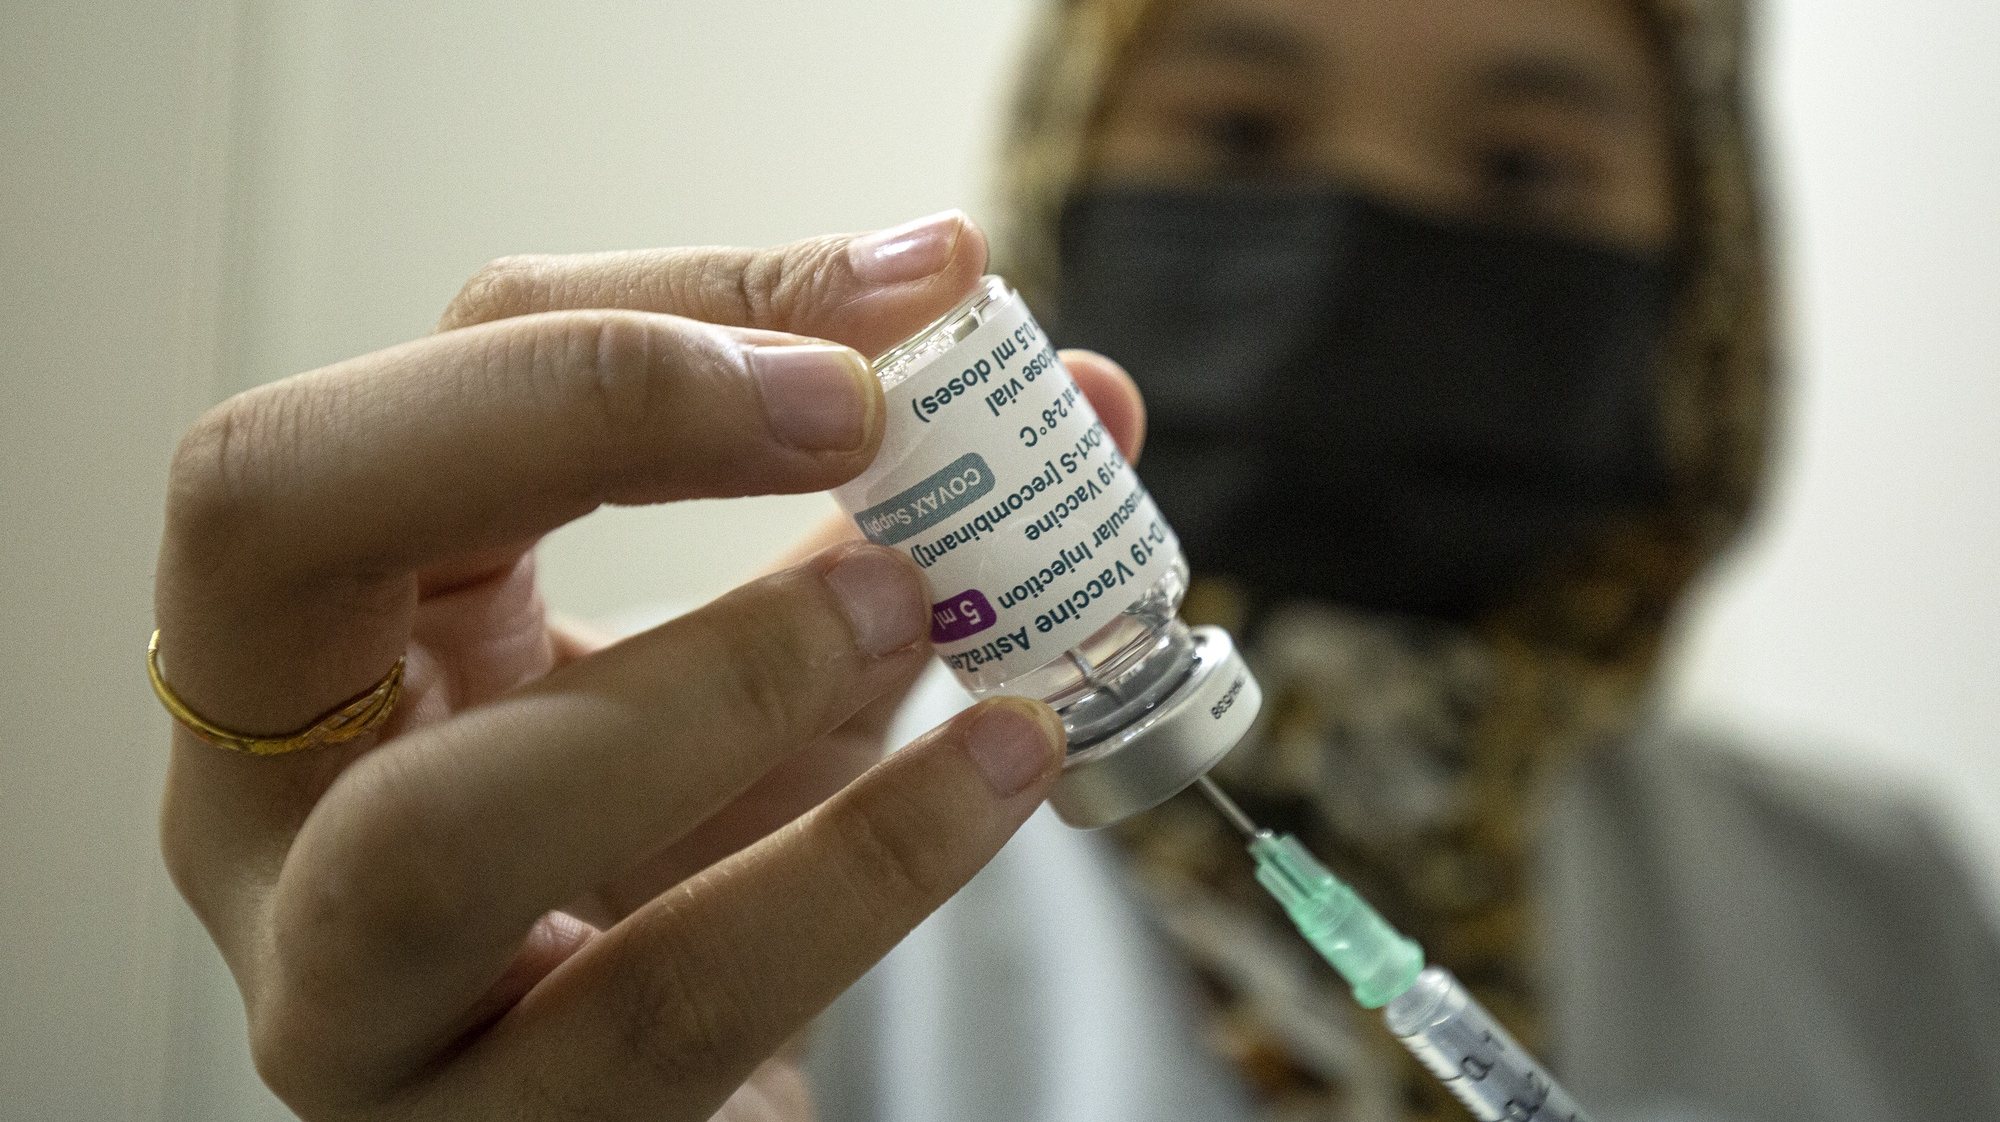 epa09203720 A medical officer prepares a dose of the AstraZeneca&#039;s anti COVID-19 vaccine during a voluntary AstraZeneca vaccination program in Kuala Lumpur, Malaysia, 16 May 2021.  Malaysia begun AstraZeneca Covid-19 vaccination program on 05 May 2021 for people, who choose to receive it, after the vaccine was removed from an ongoing roll-out due to public fears over its safety.  EPA/AHMAD YUSNI